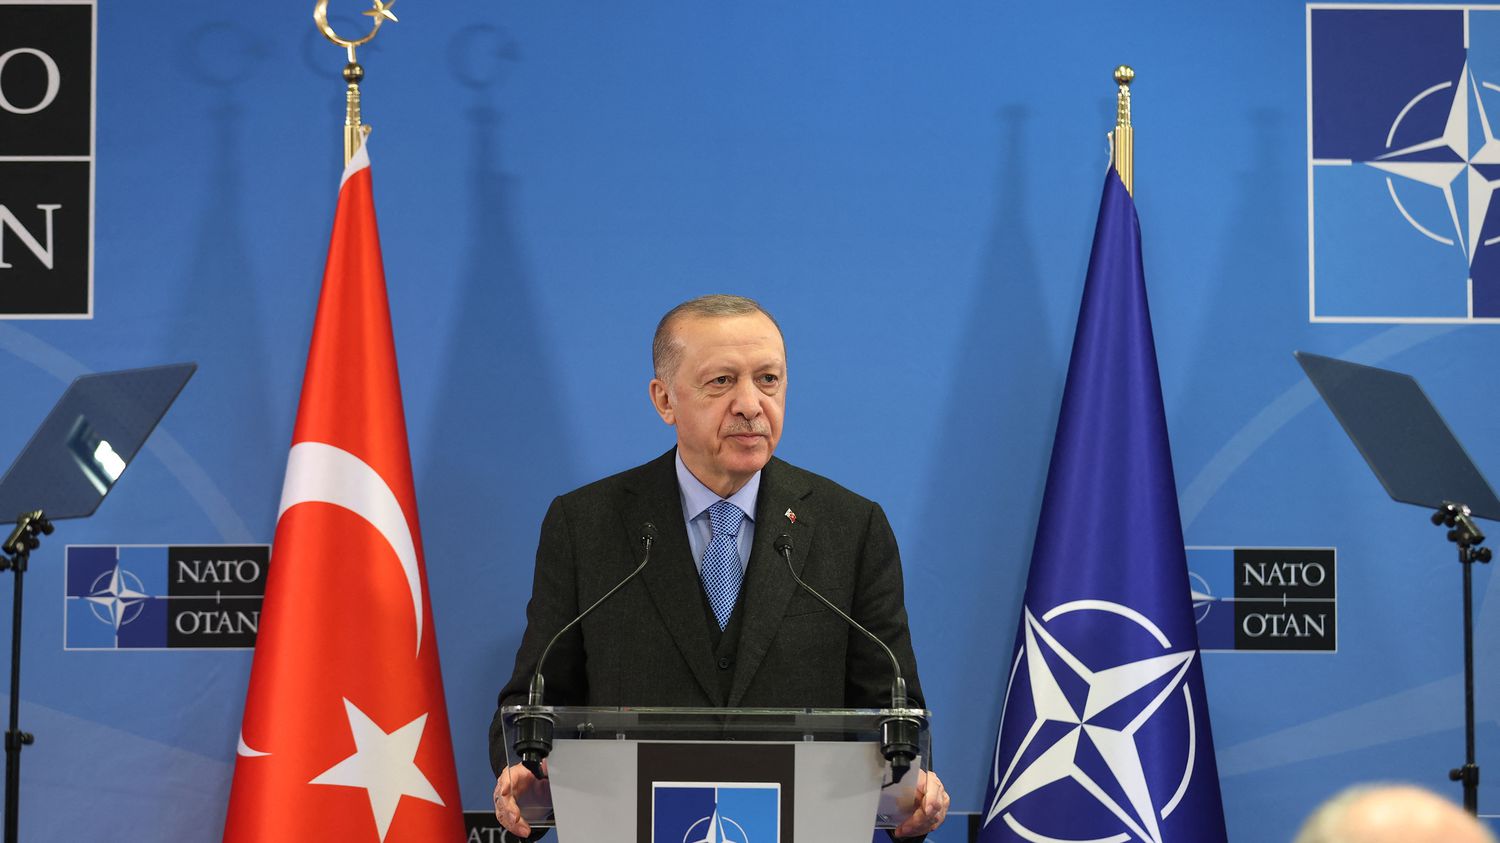 Turkey threatens to block Sweden and Finland from joining NATO
